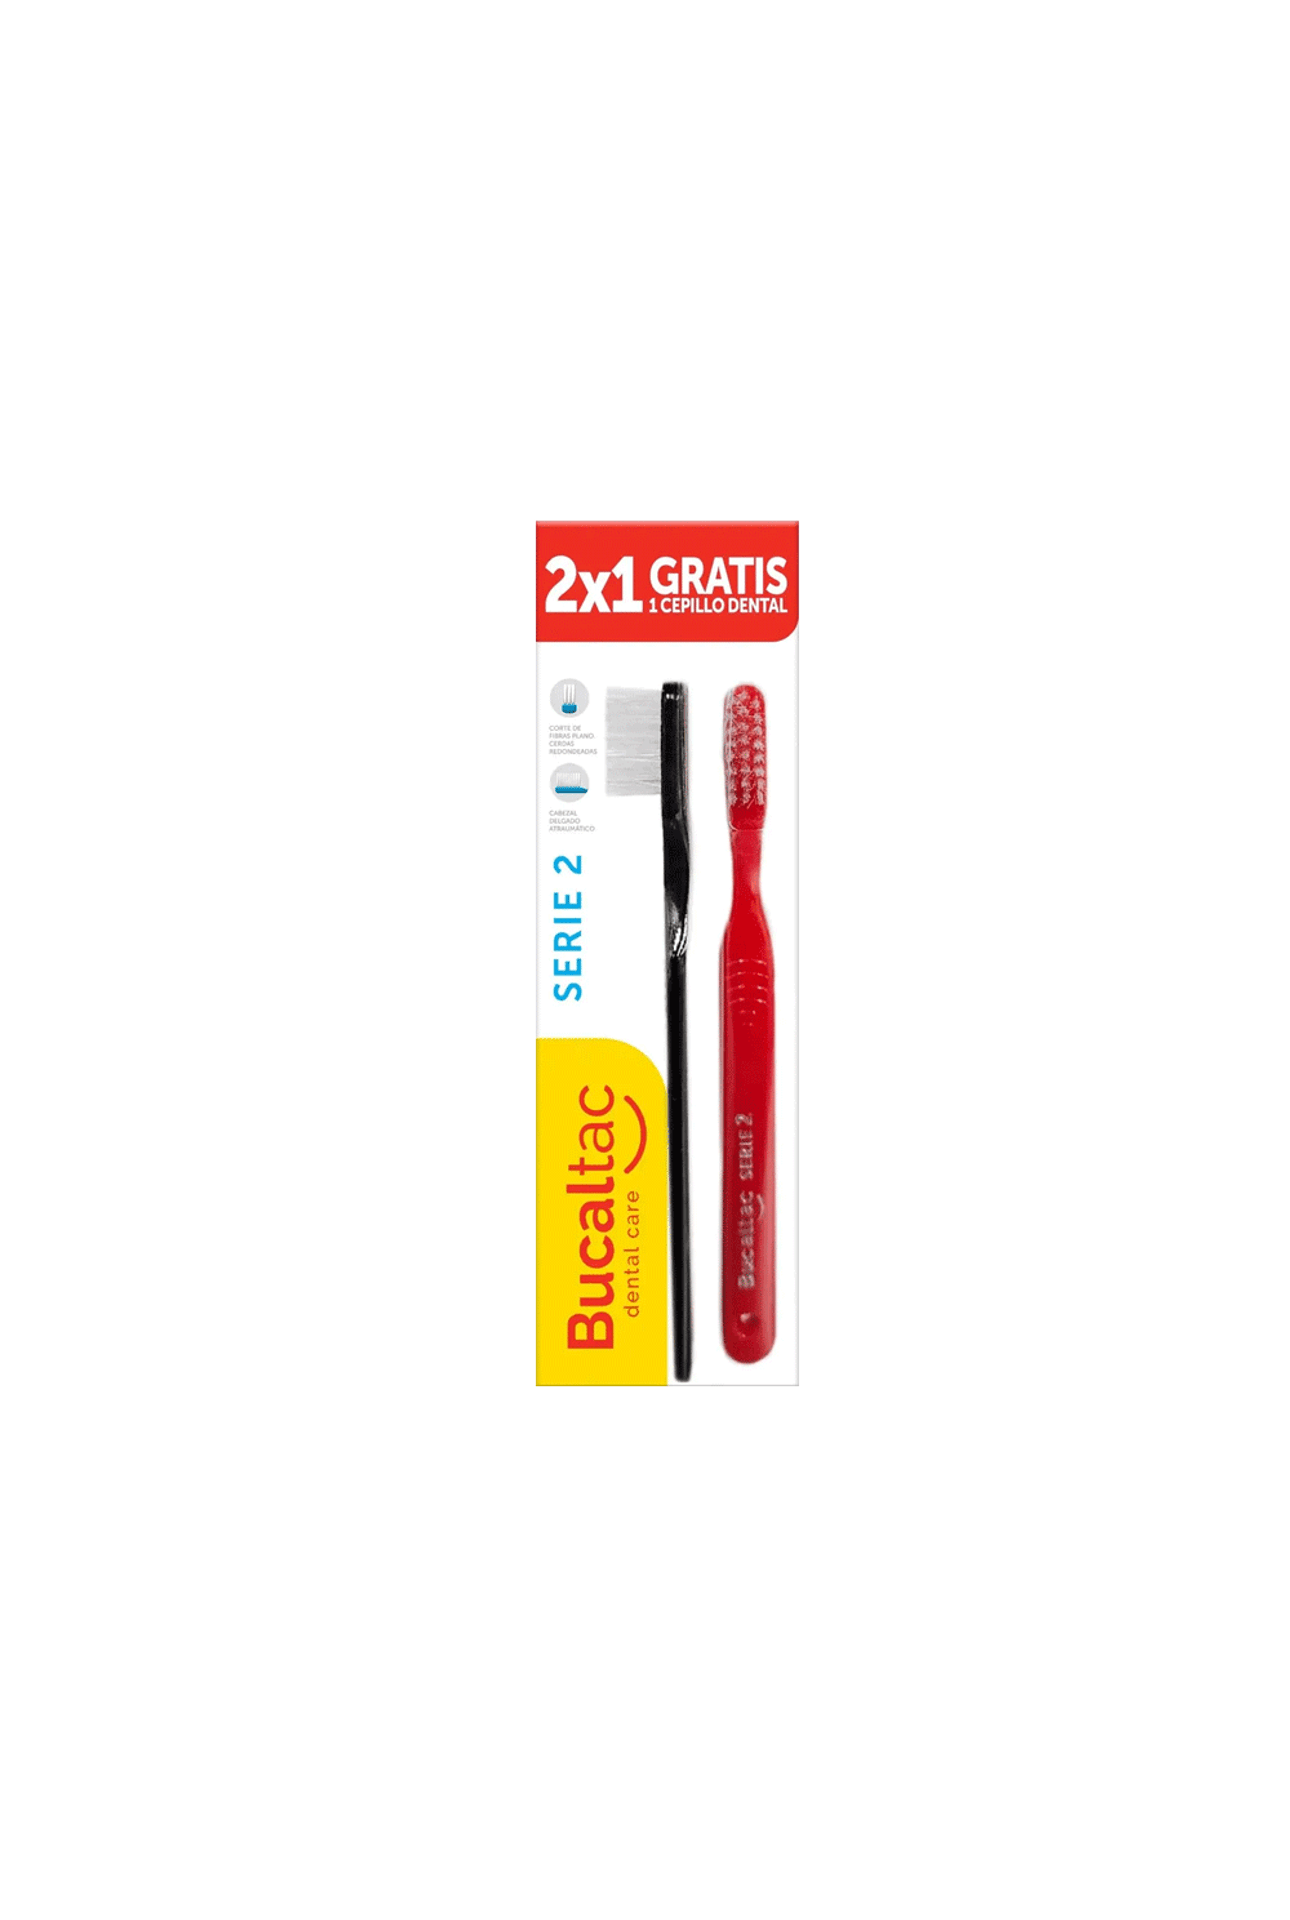 Cepillo-Bucal-Tac-Serie-2-Pack-x-2-unid-Bucal-Tac